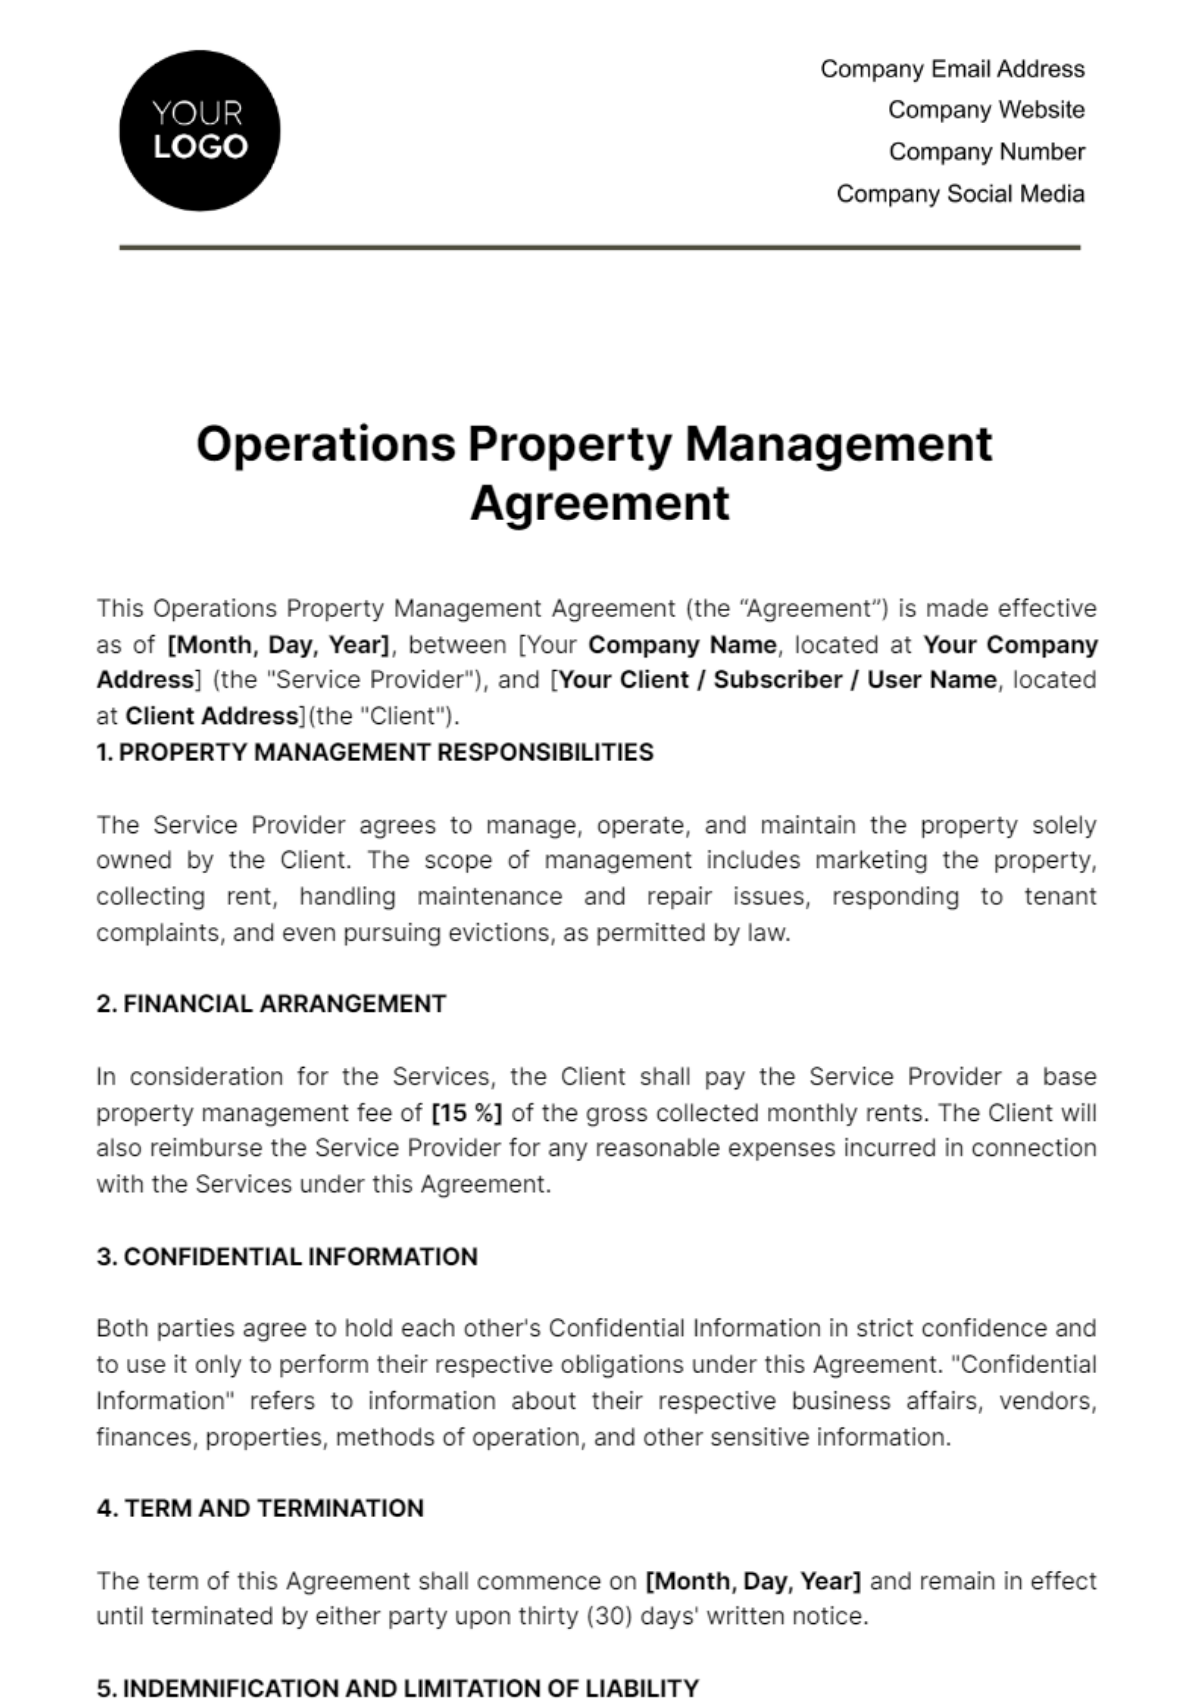 Operations Property Management Agreement Template